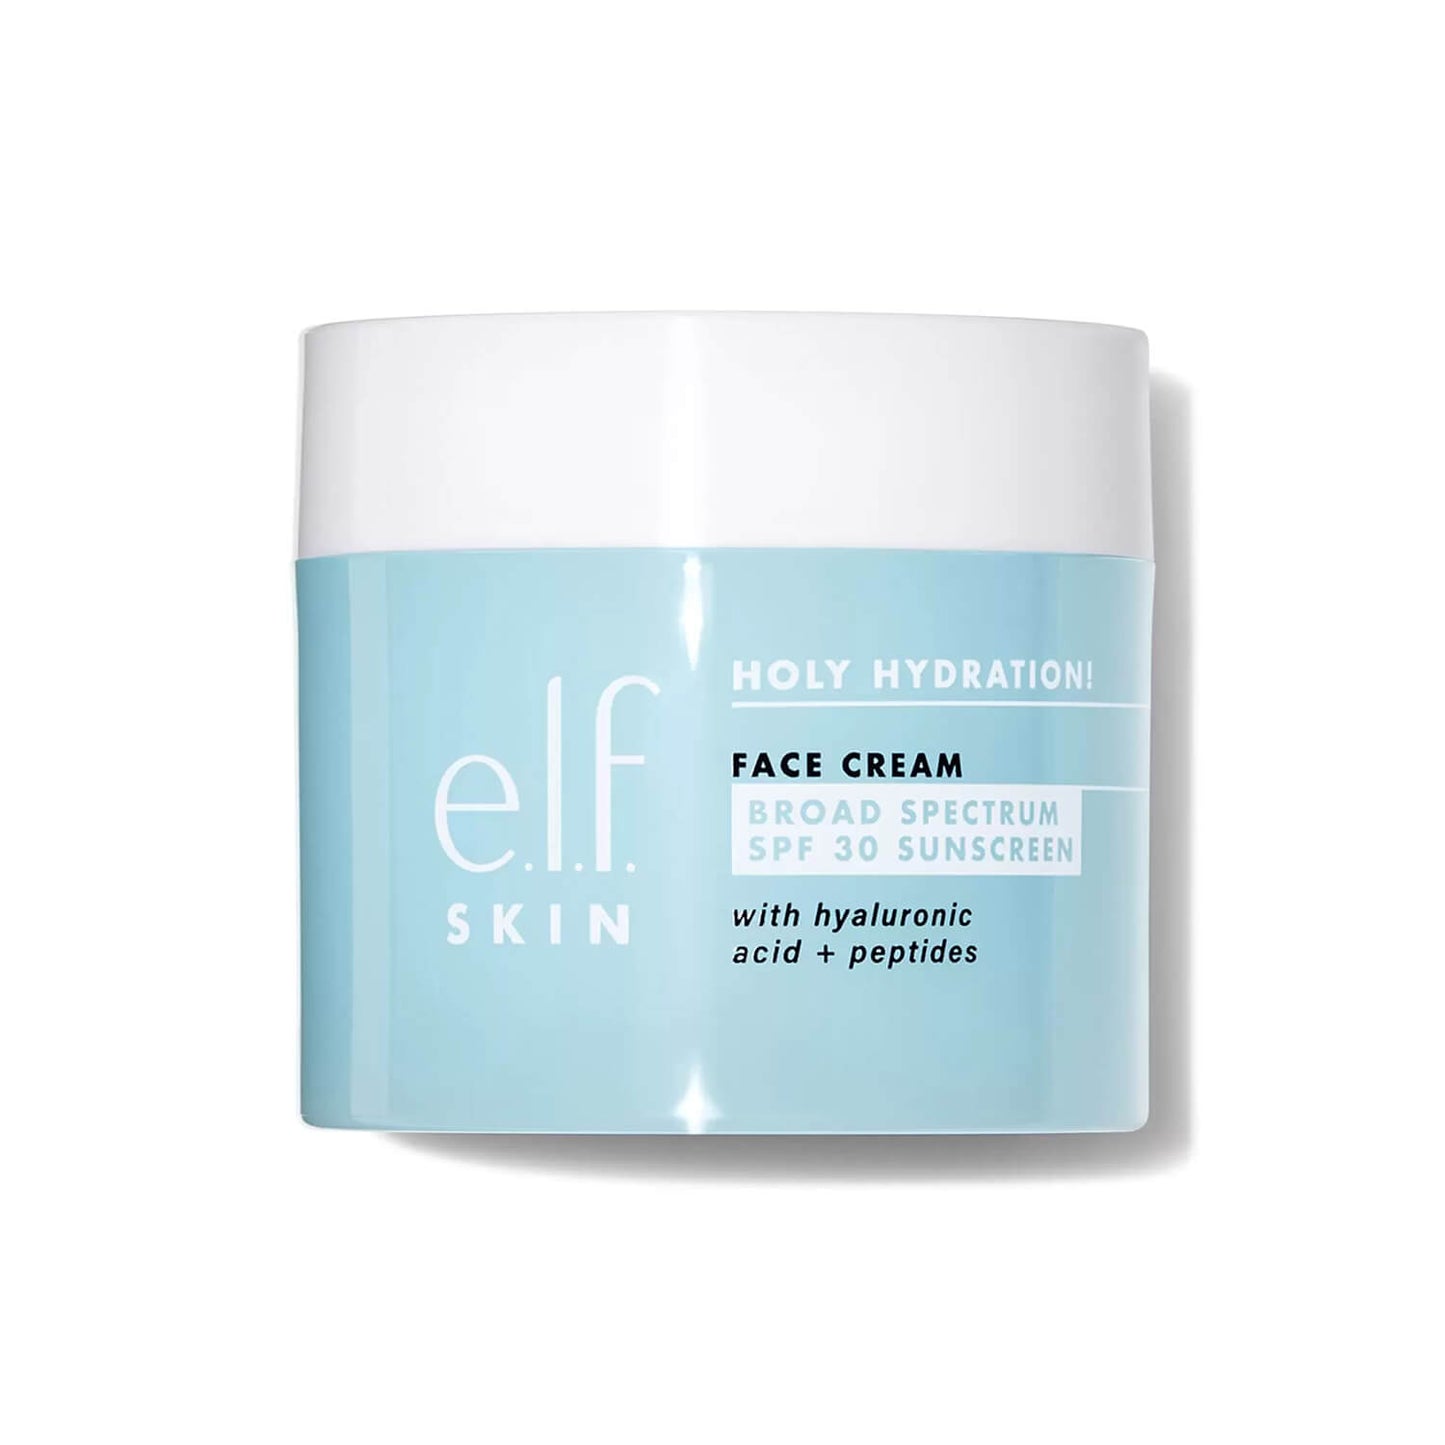 Shop Elf Holy Hydration Face Cream SPF 30 for all skin types available at heygirl.pk for delivery in Pakistan